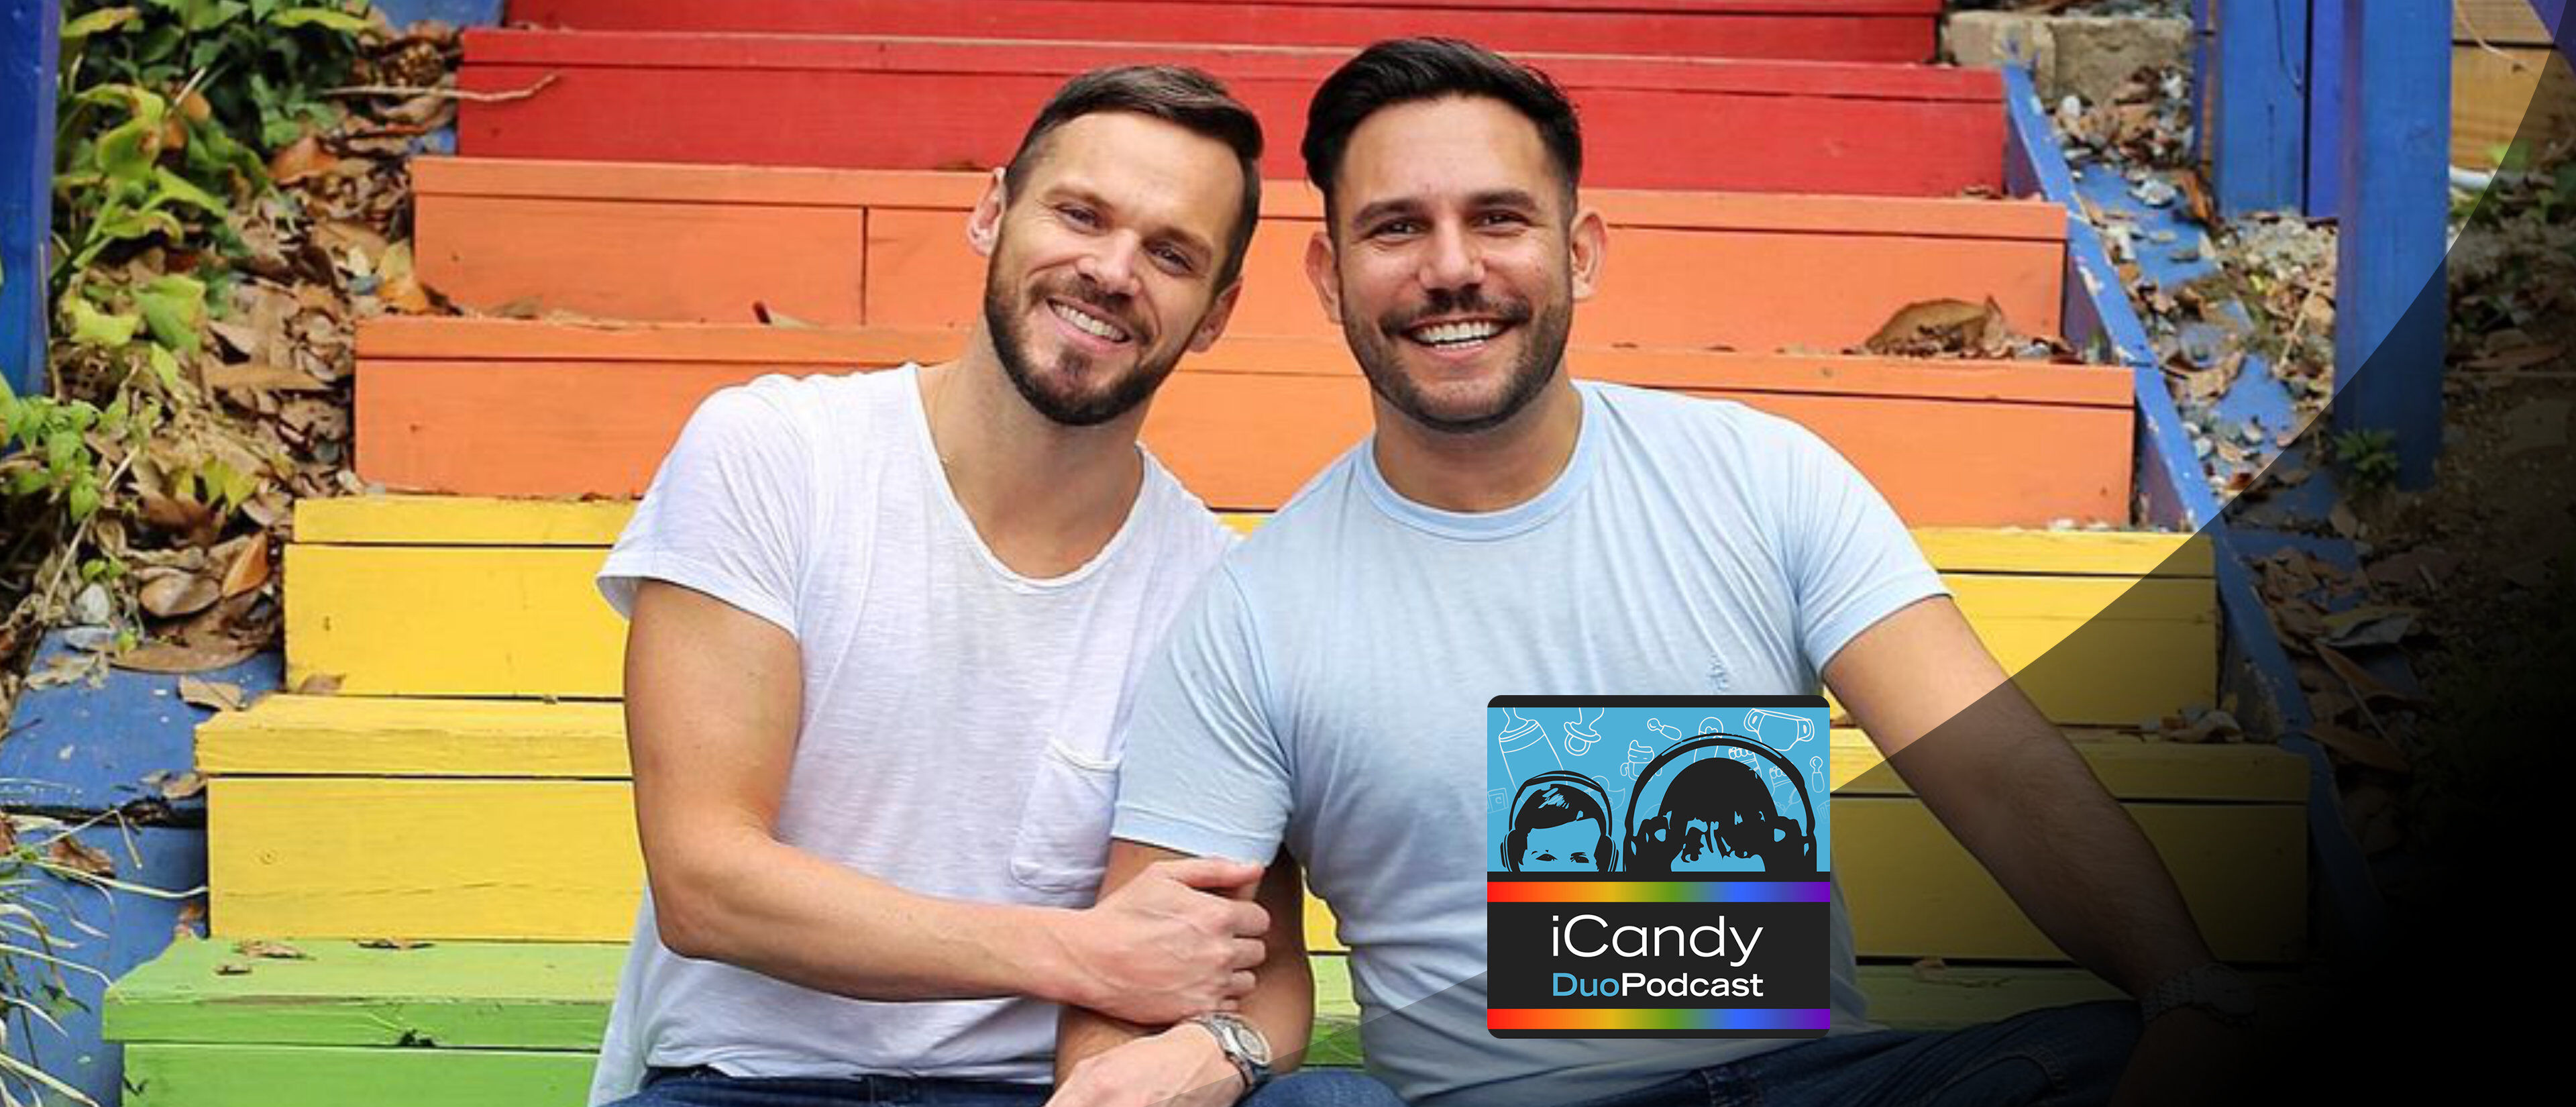 The iCandy Duo Podcast - The Travelling Gays